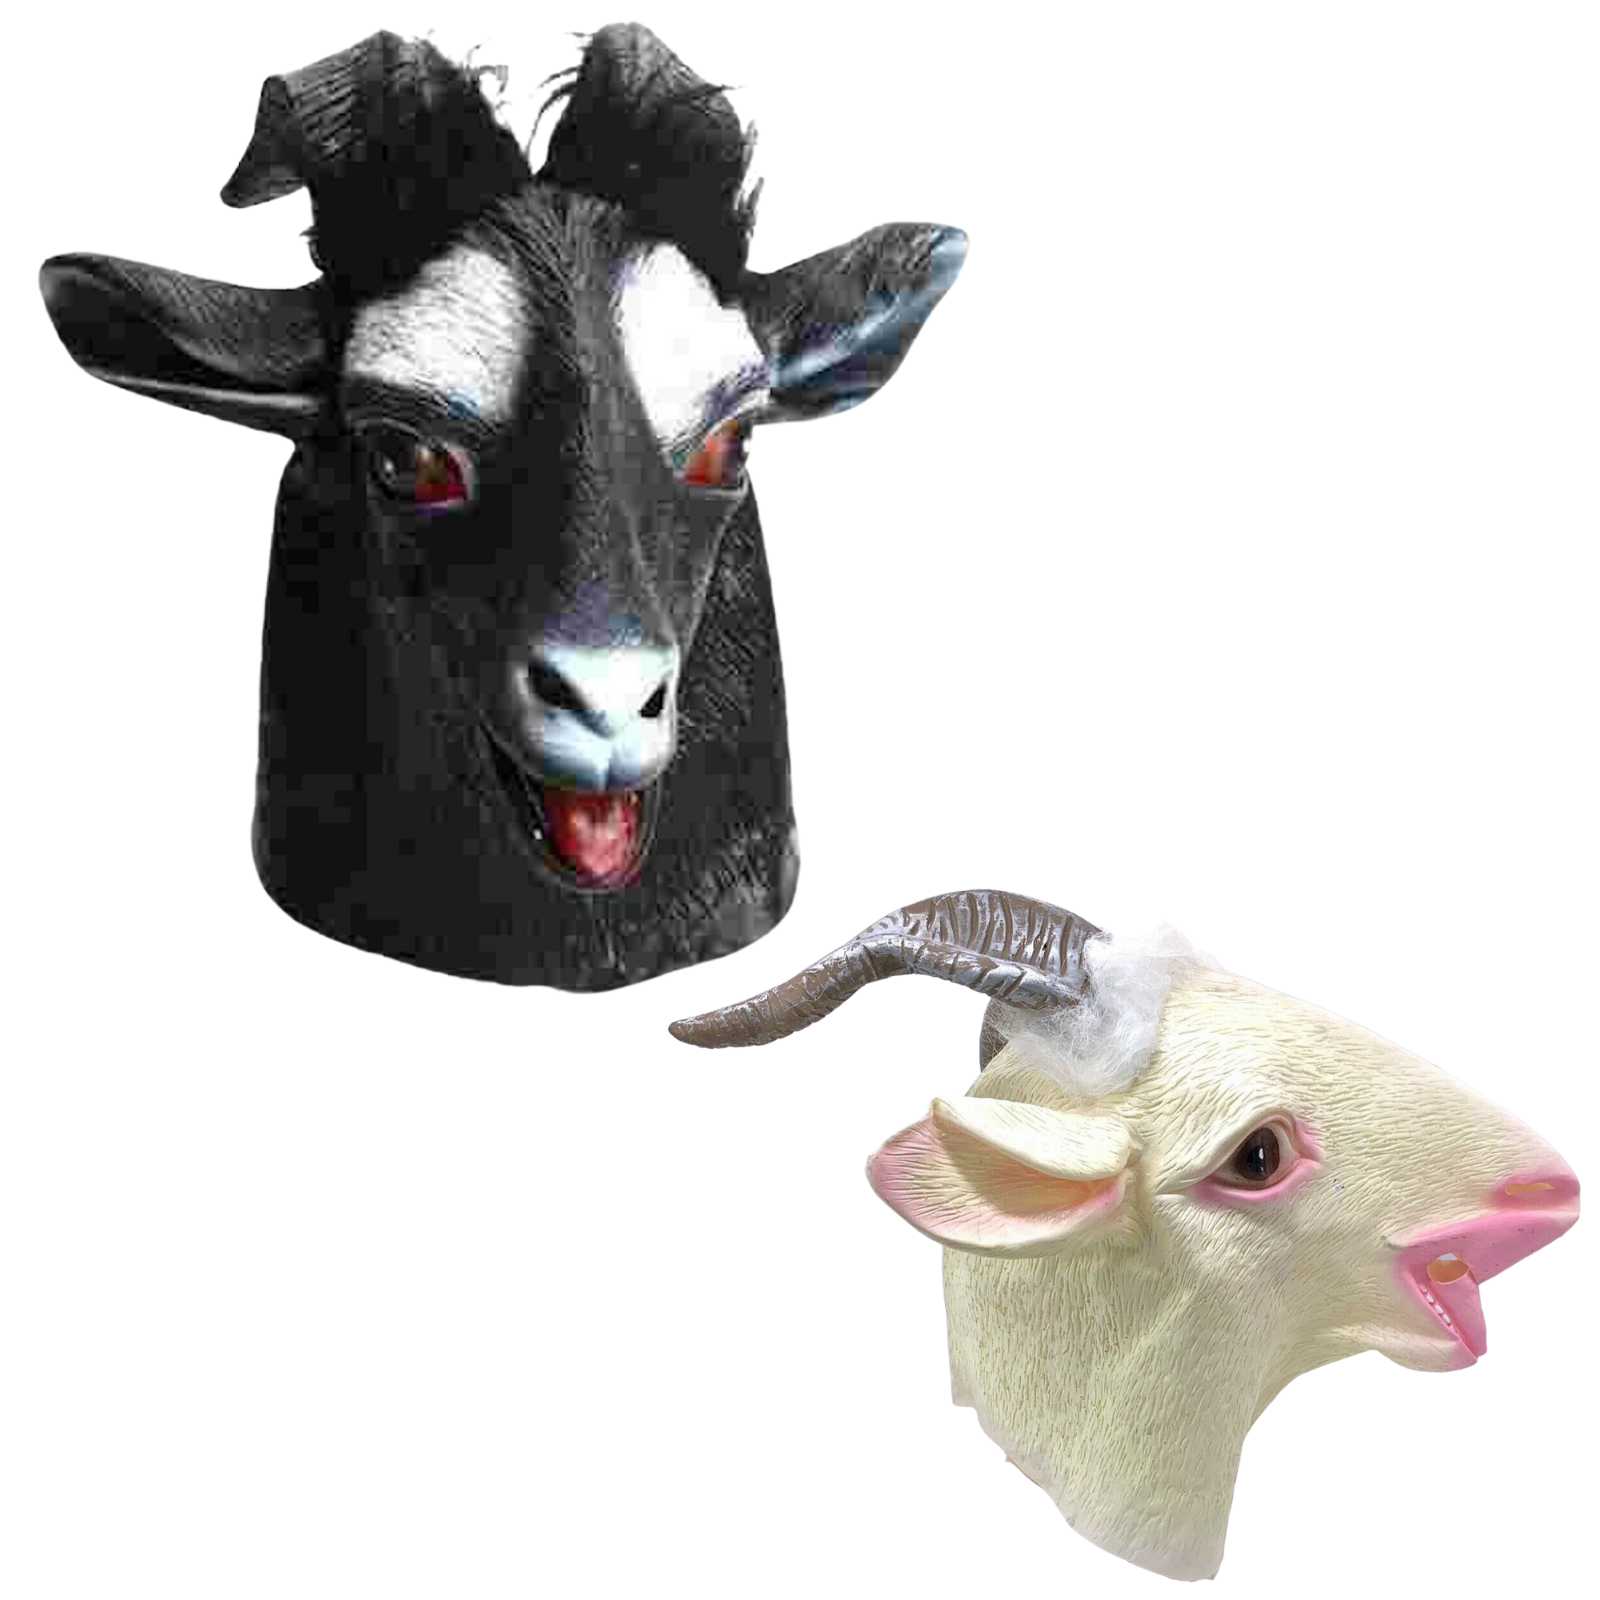 GOAT RUBBER MASK Latex Head Face Halloween Costume Party Animal Cosplay  Sheep | eBay